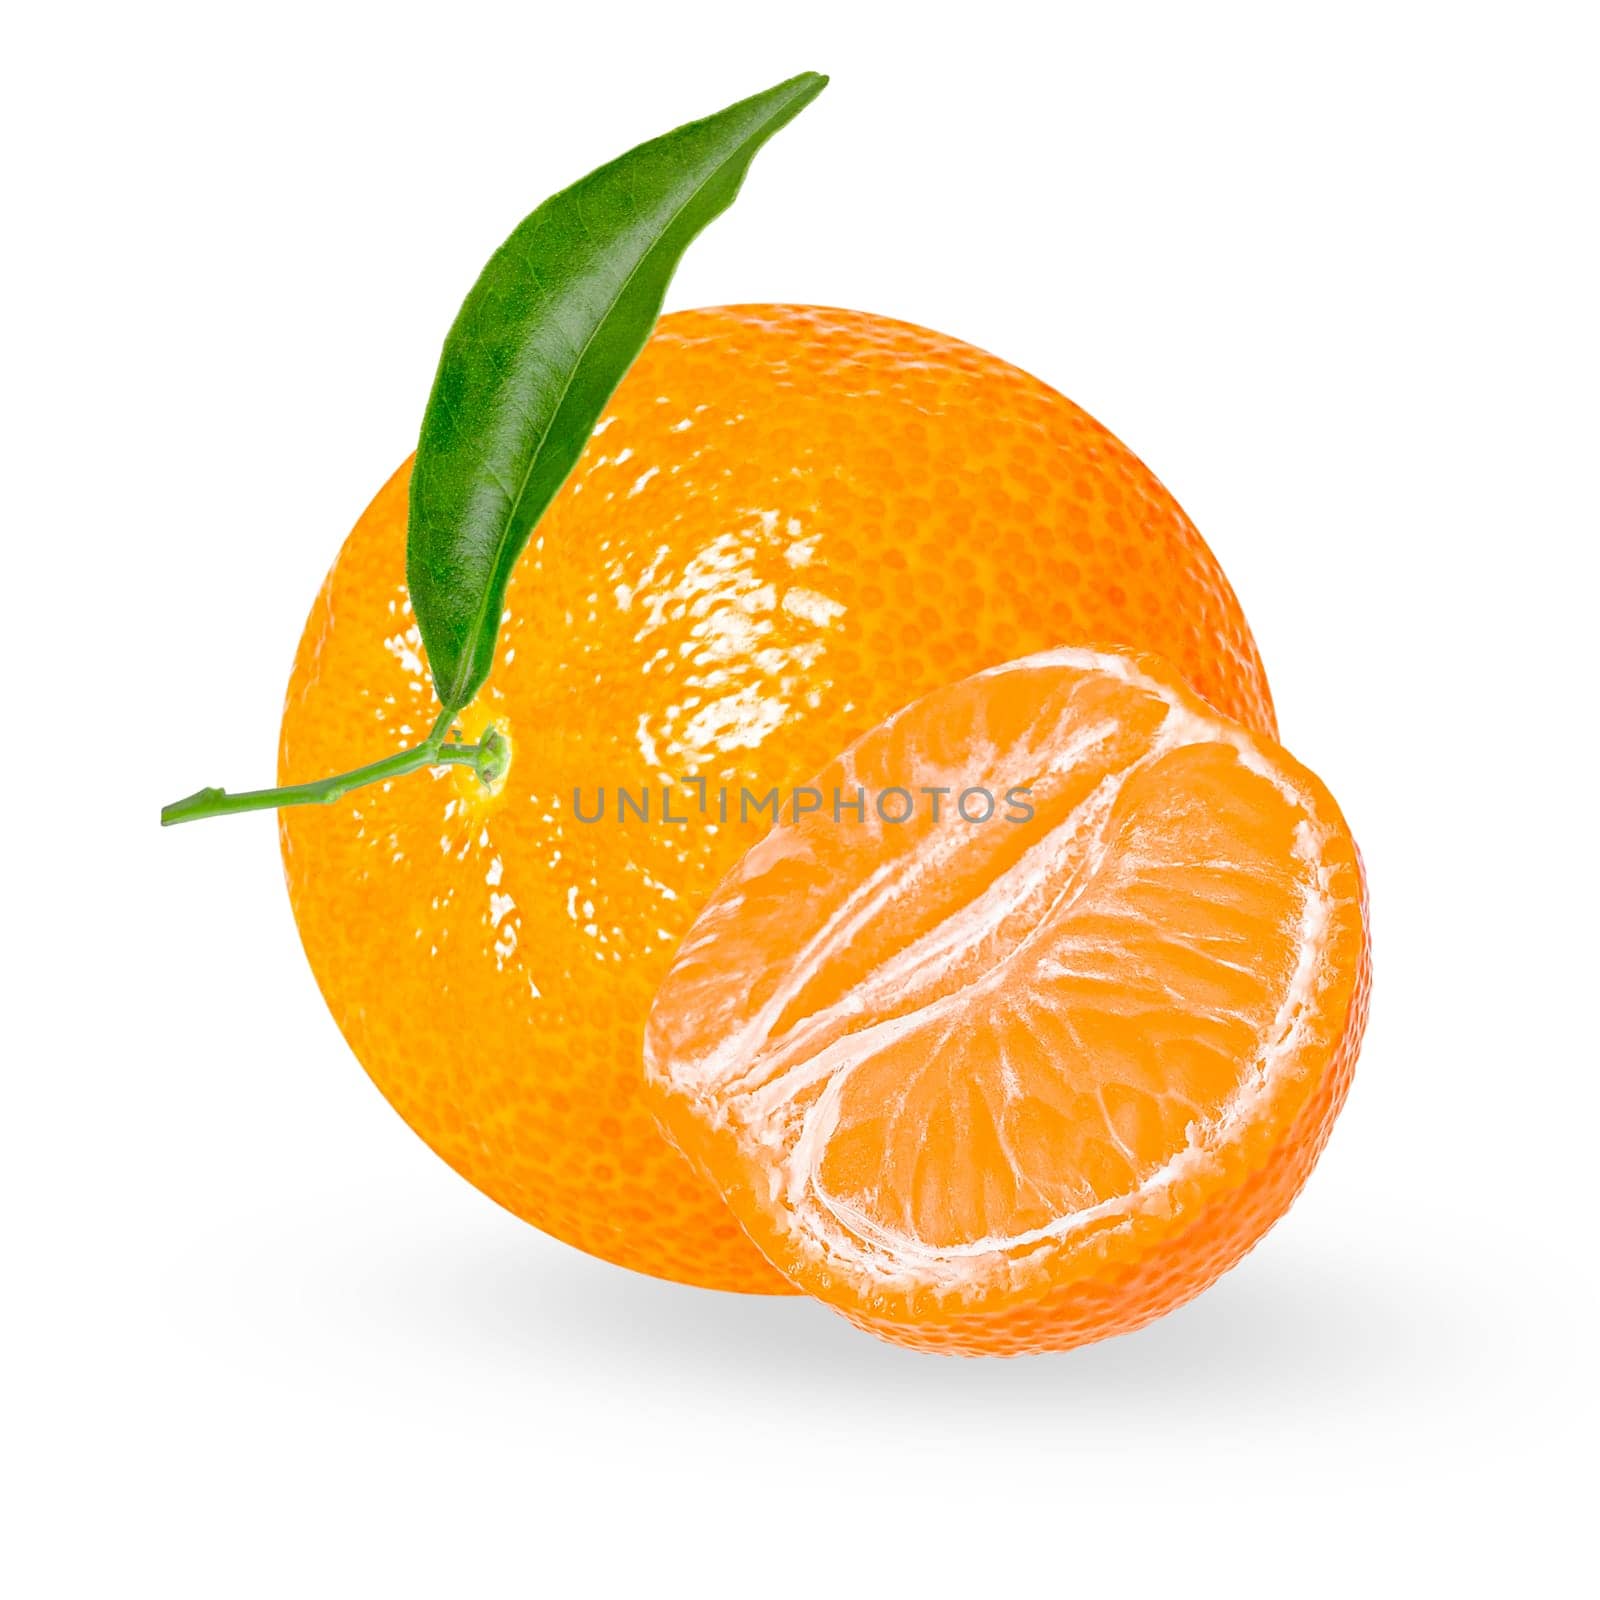 Mandarin or clementine with green leaf isolated on white background by Ciorba